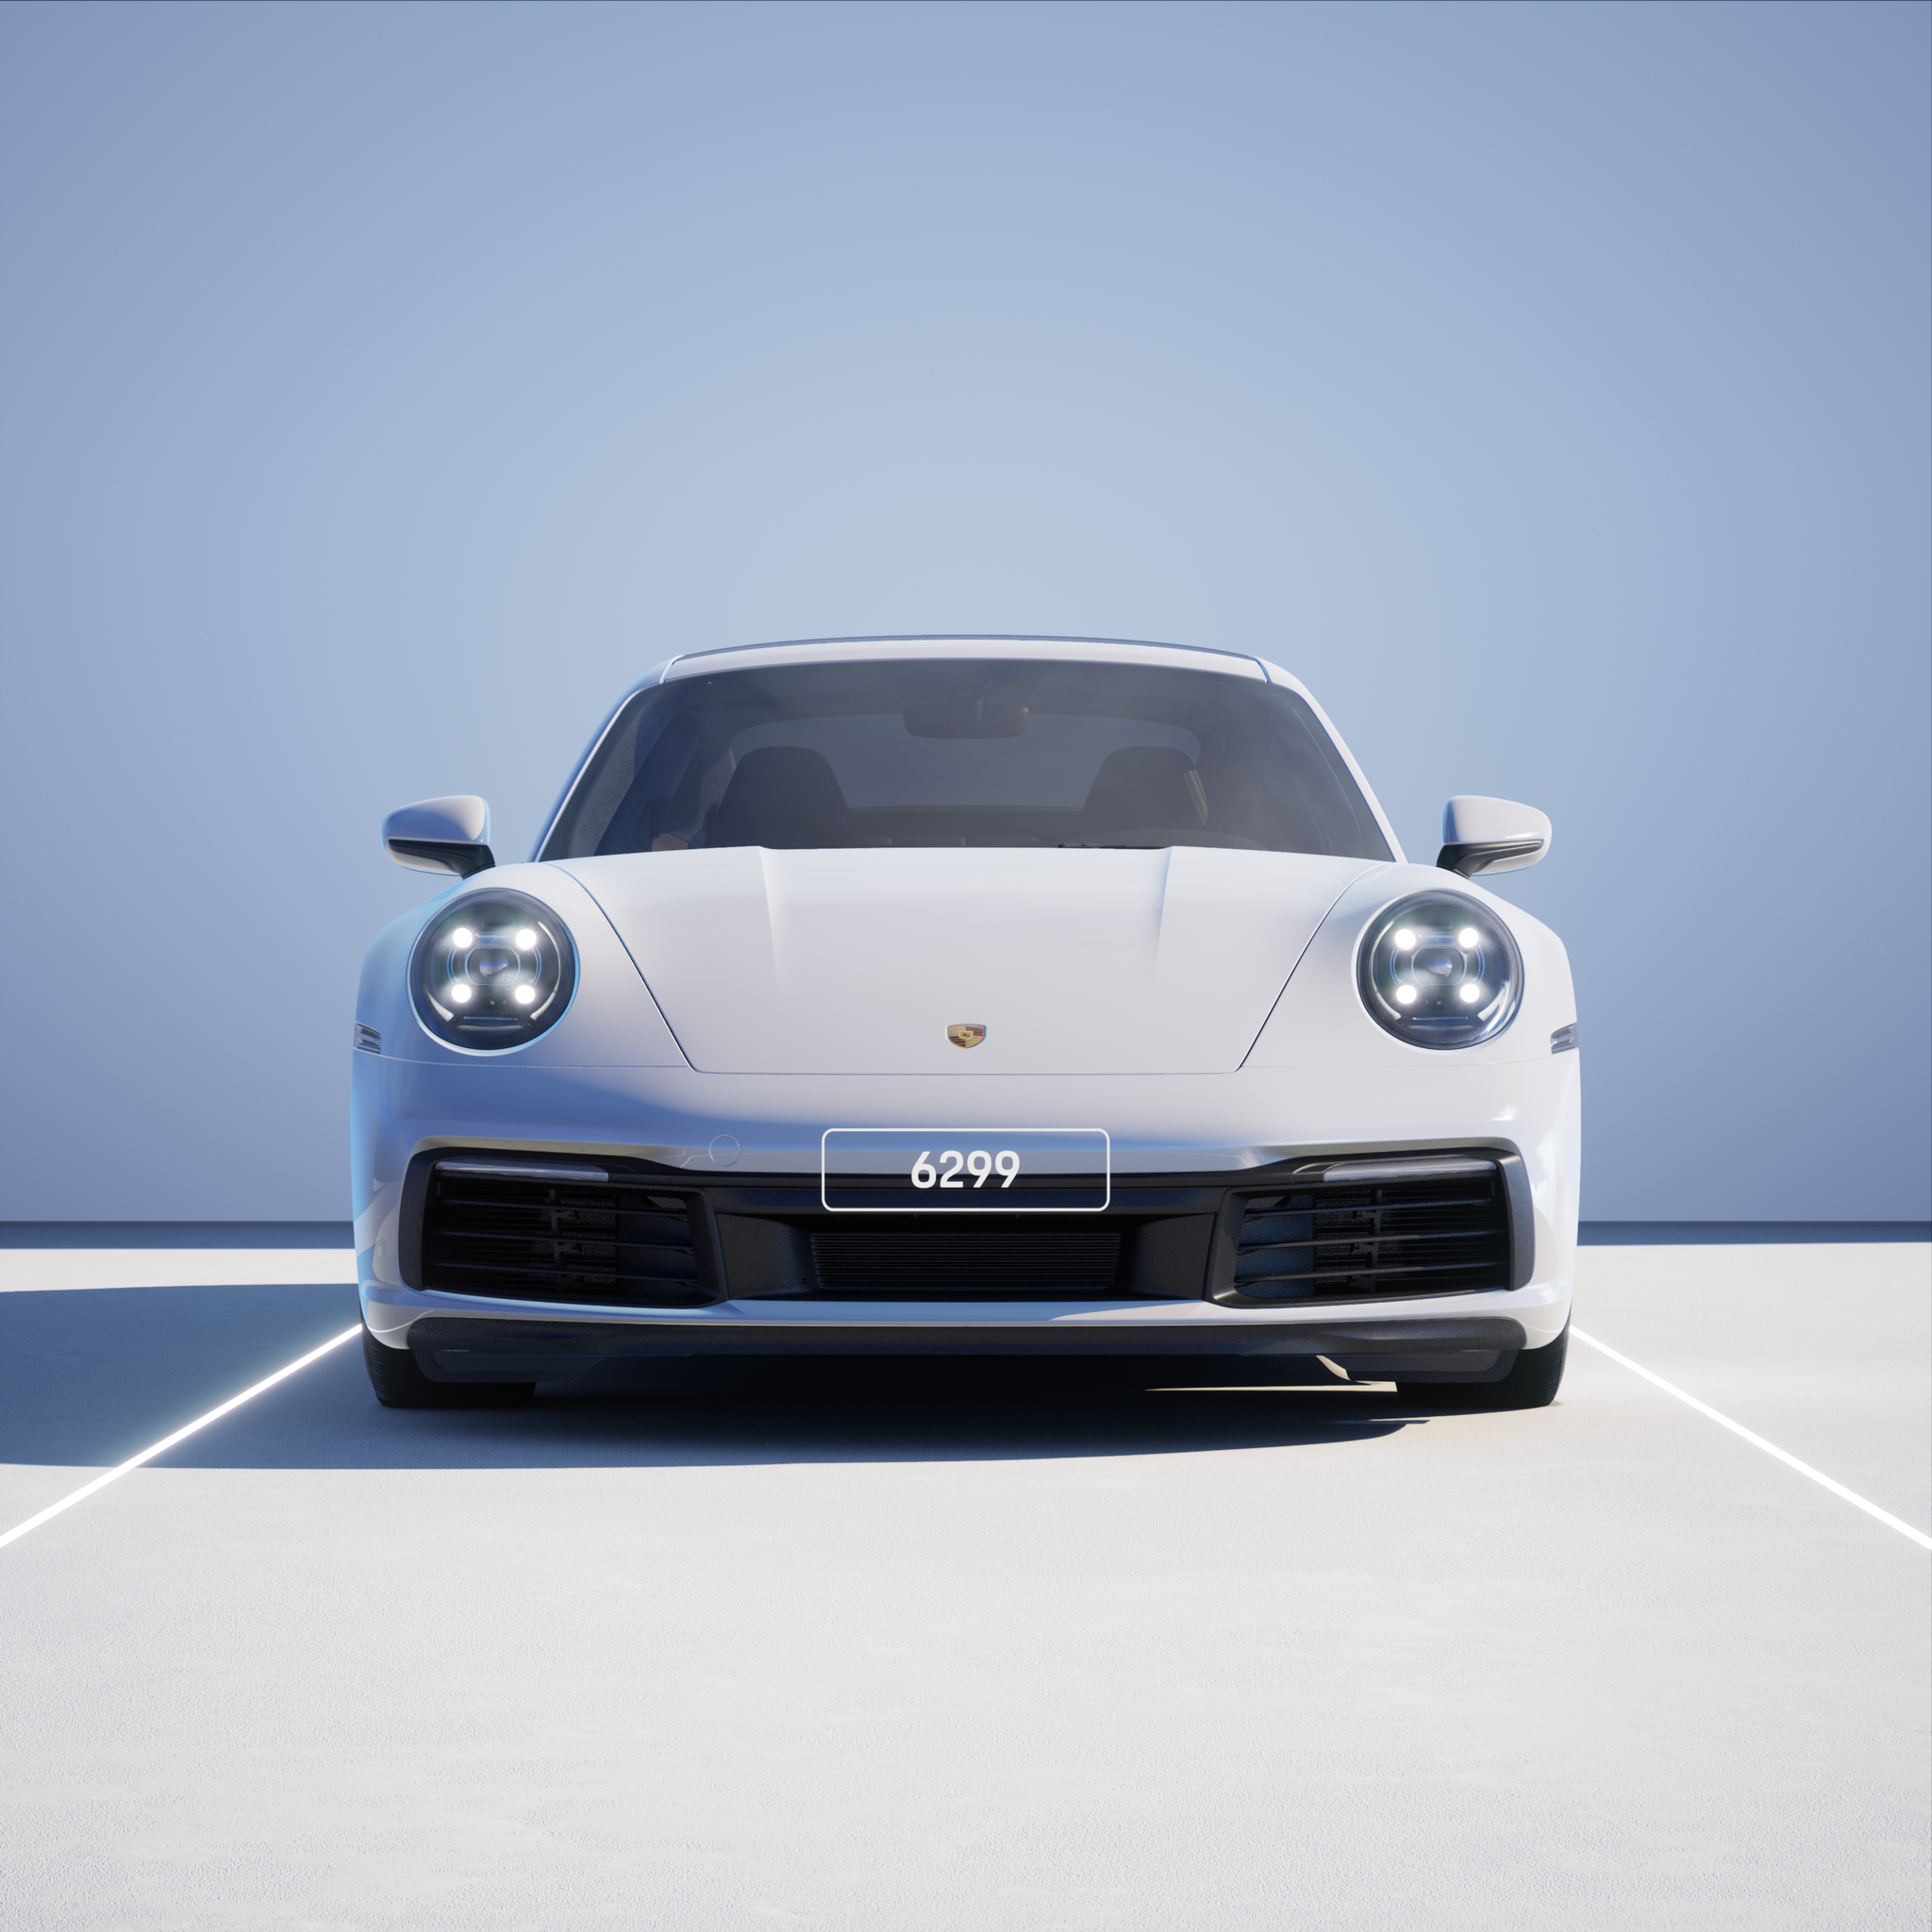 The PORSCHΞ 911 6299 image in phase